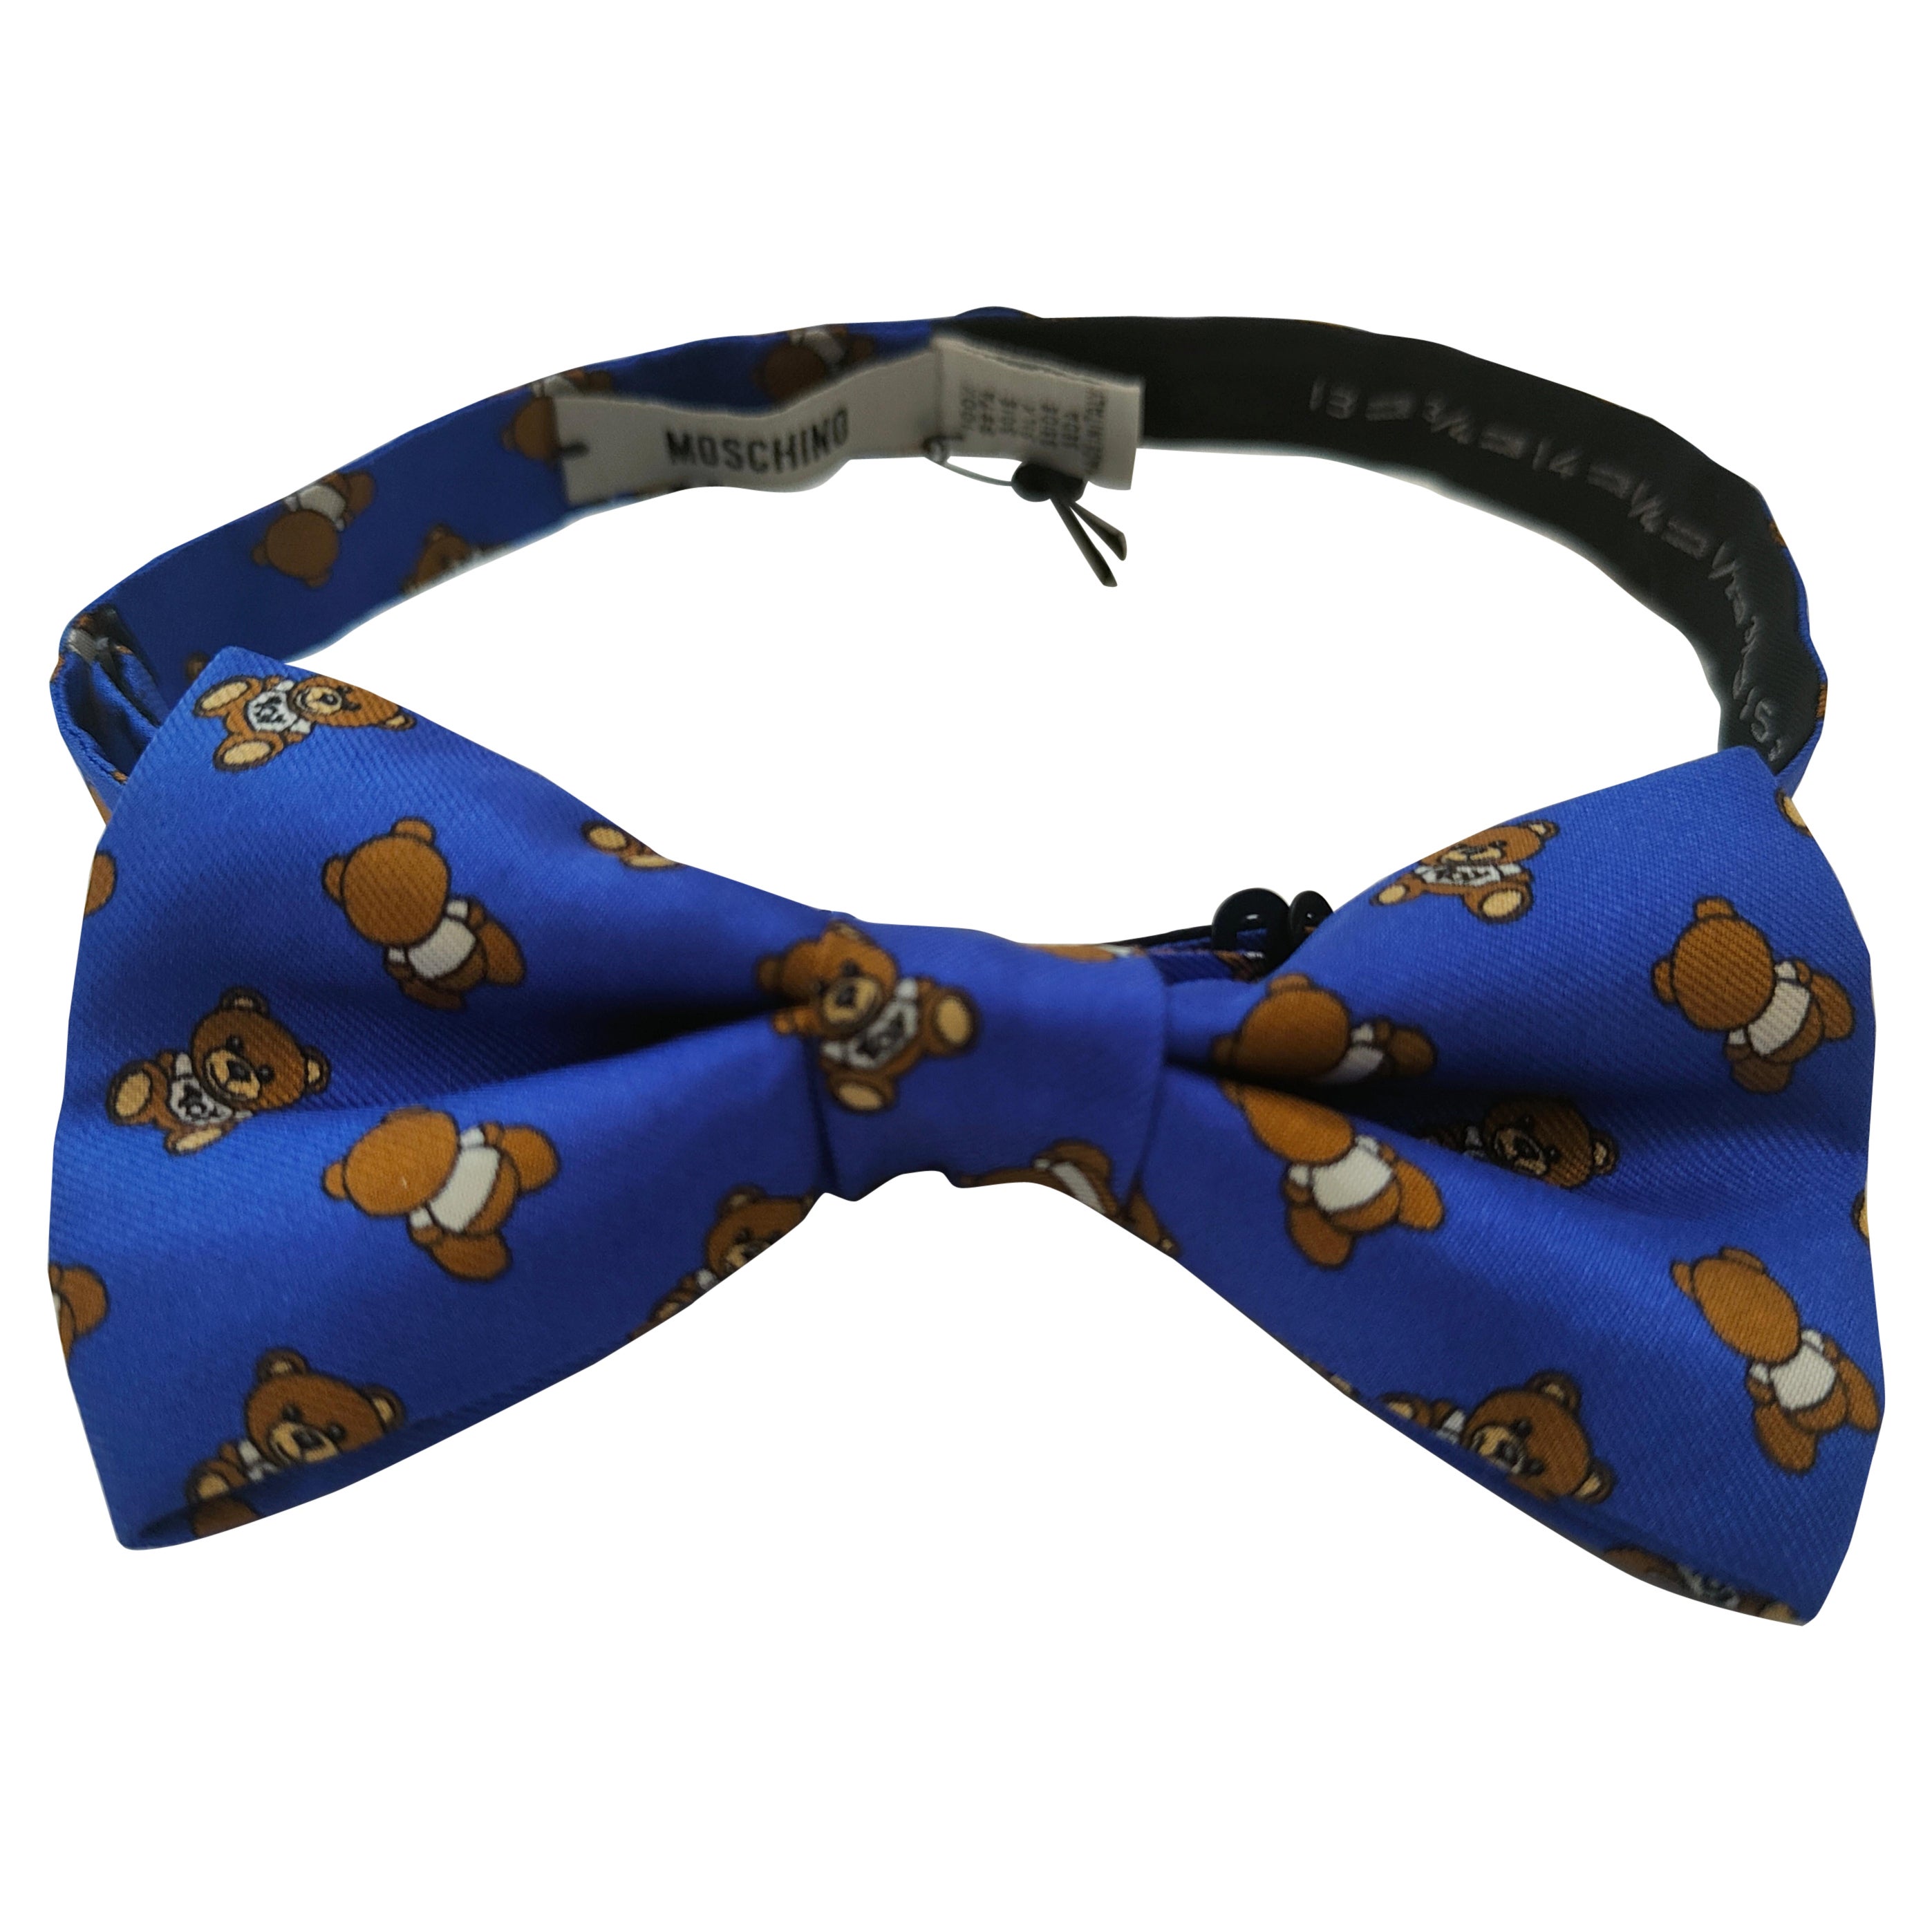 Moschino Blue multicoloured bow tie NWOT For Sale